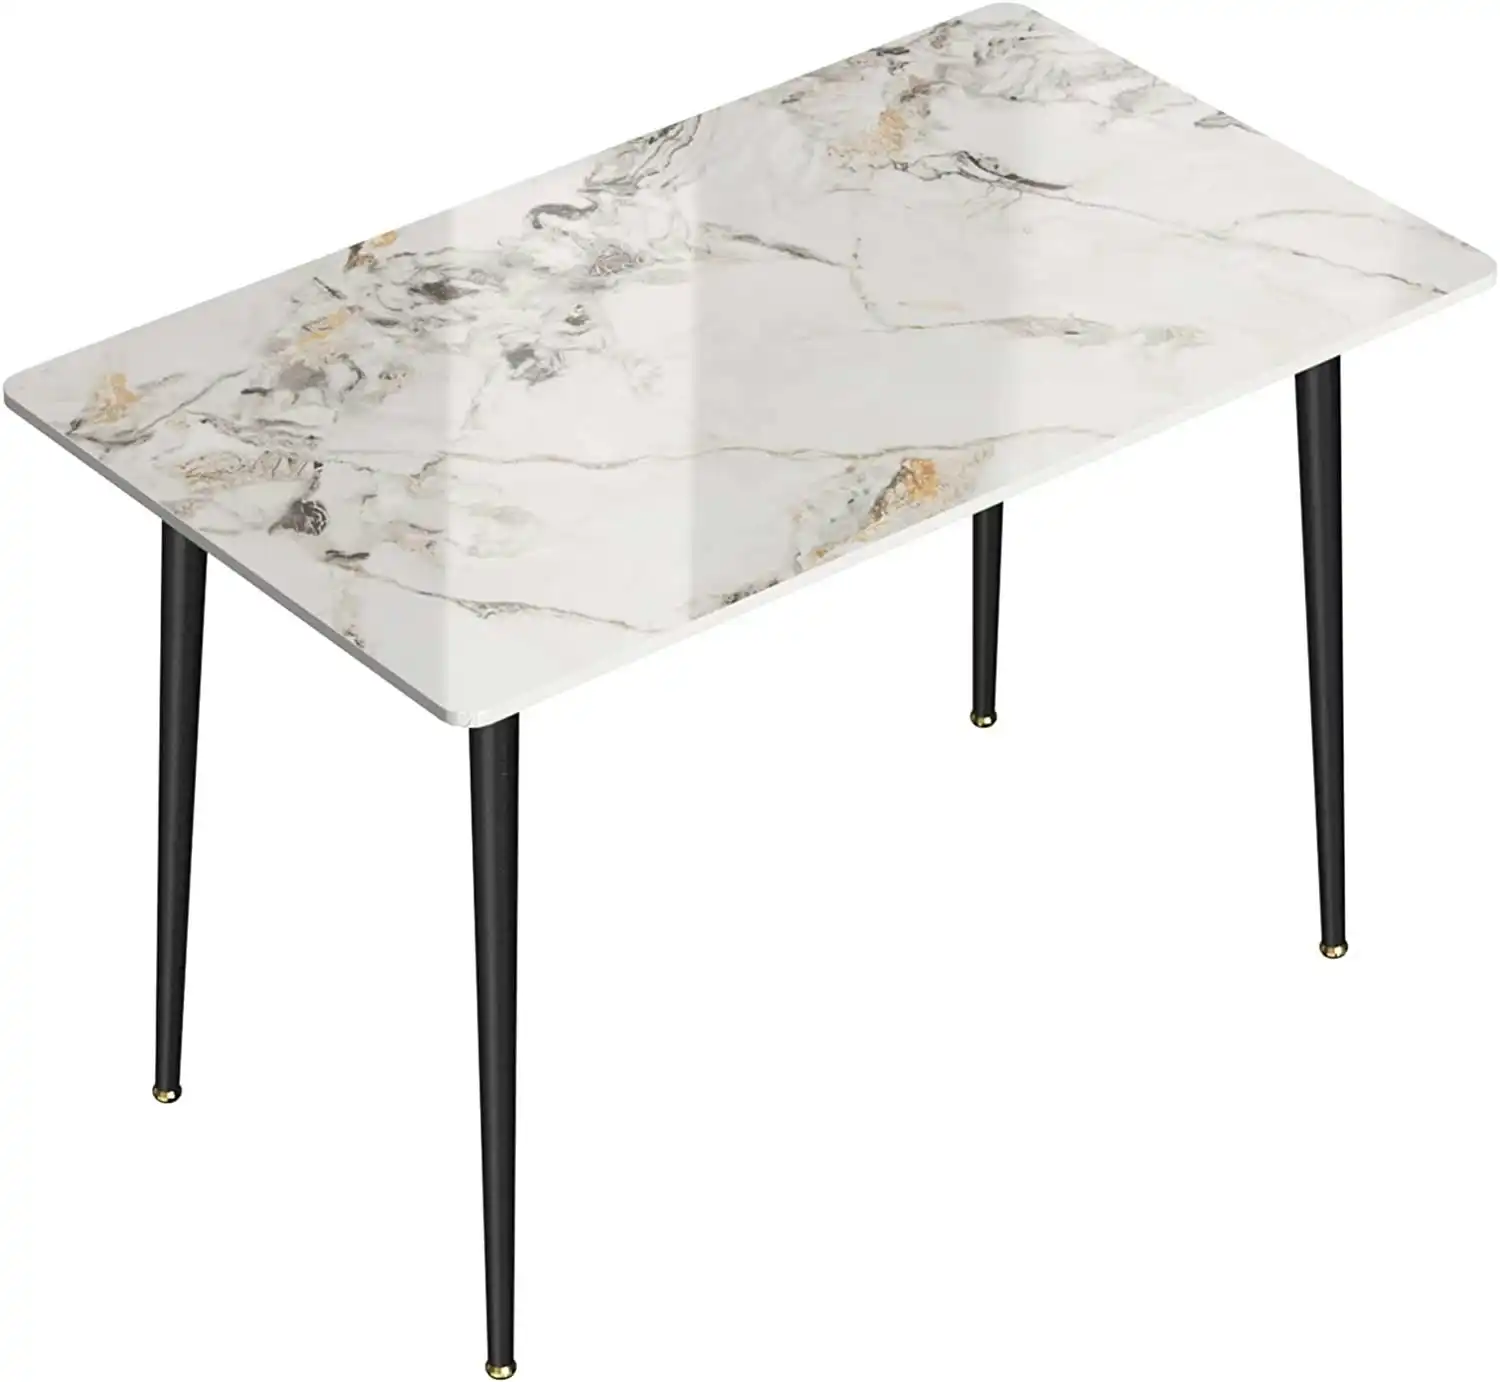 Rectangular Dining table made of Marble (Cold Jadeite) 120cm